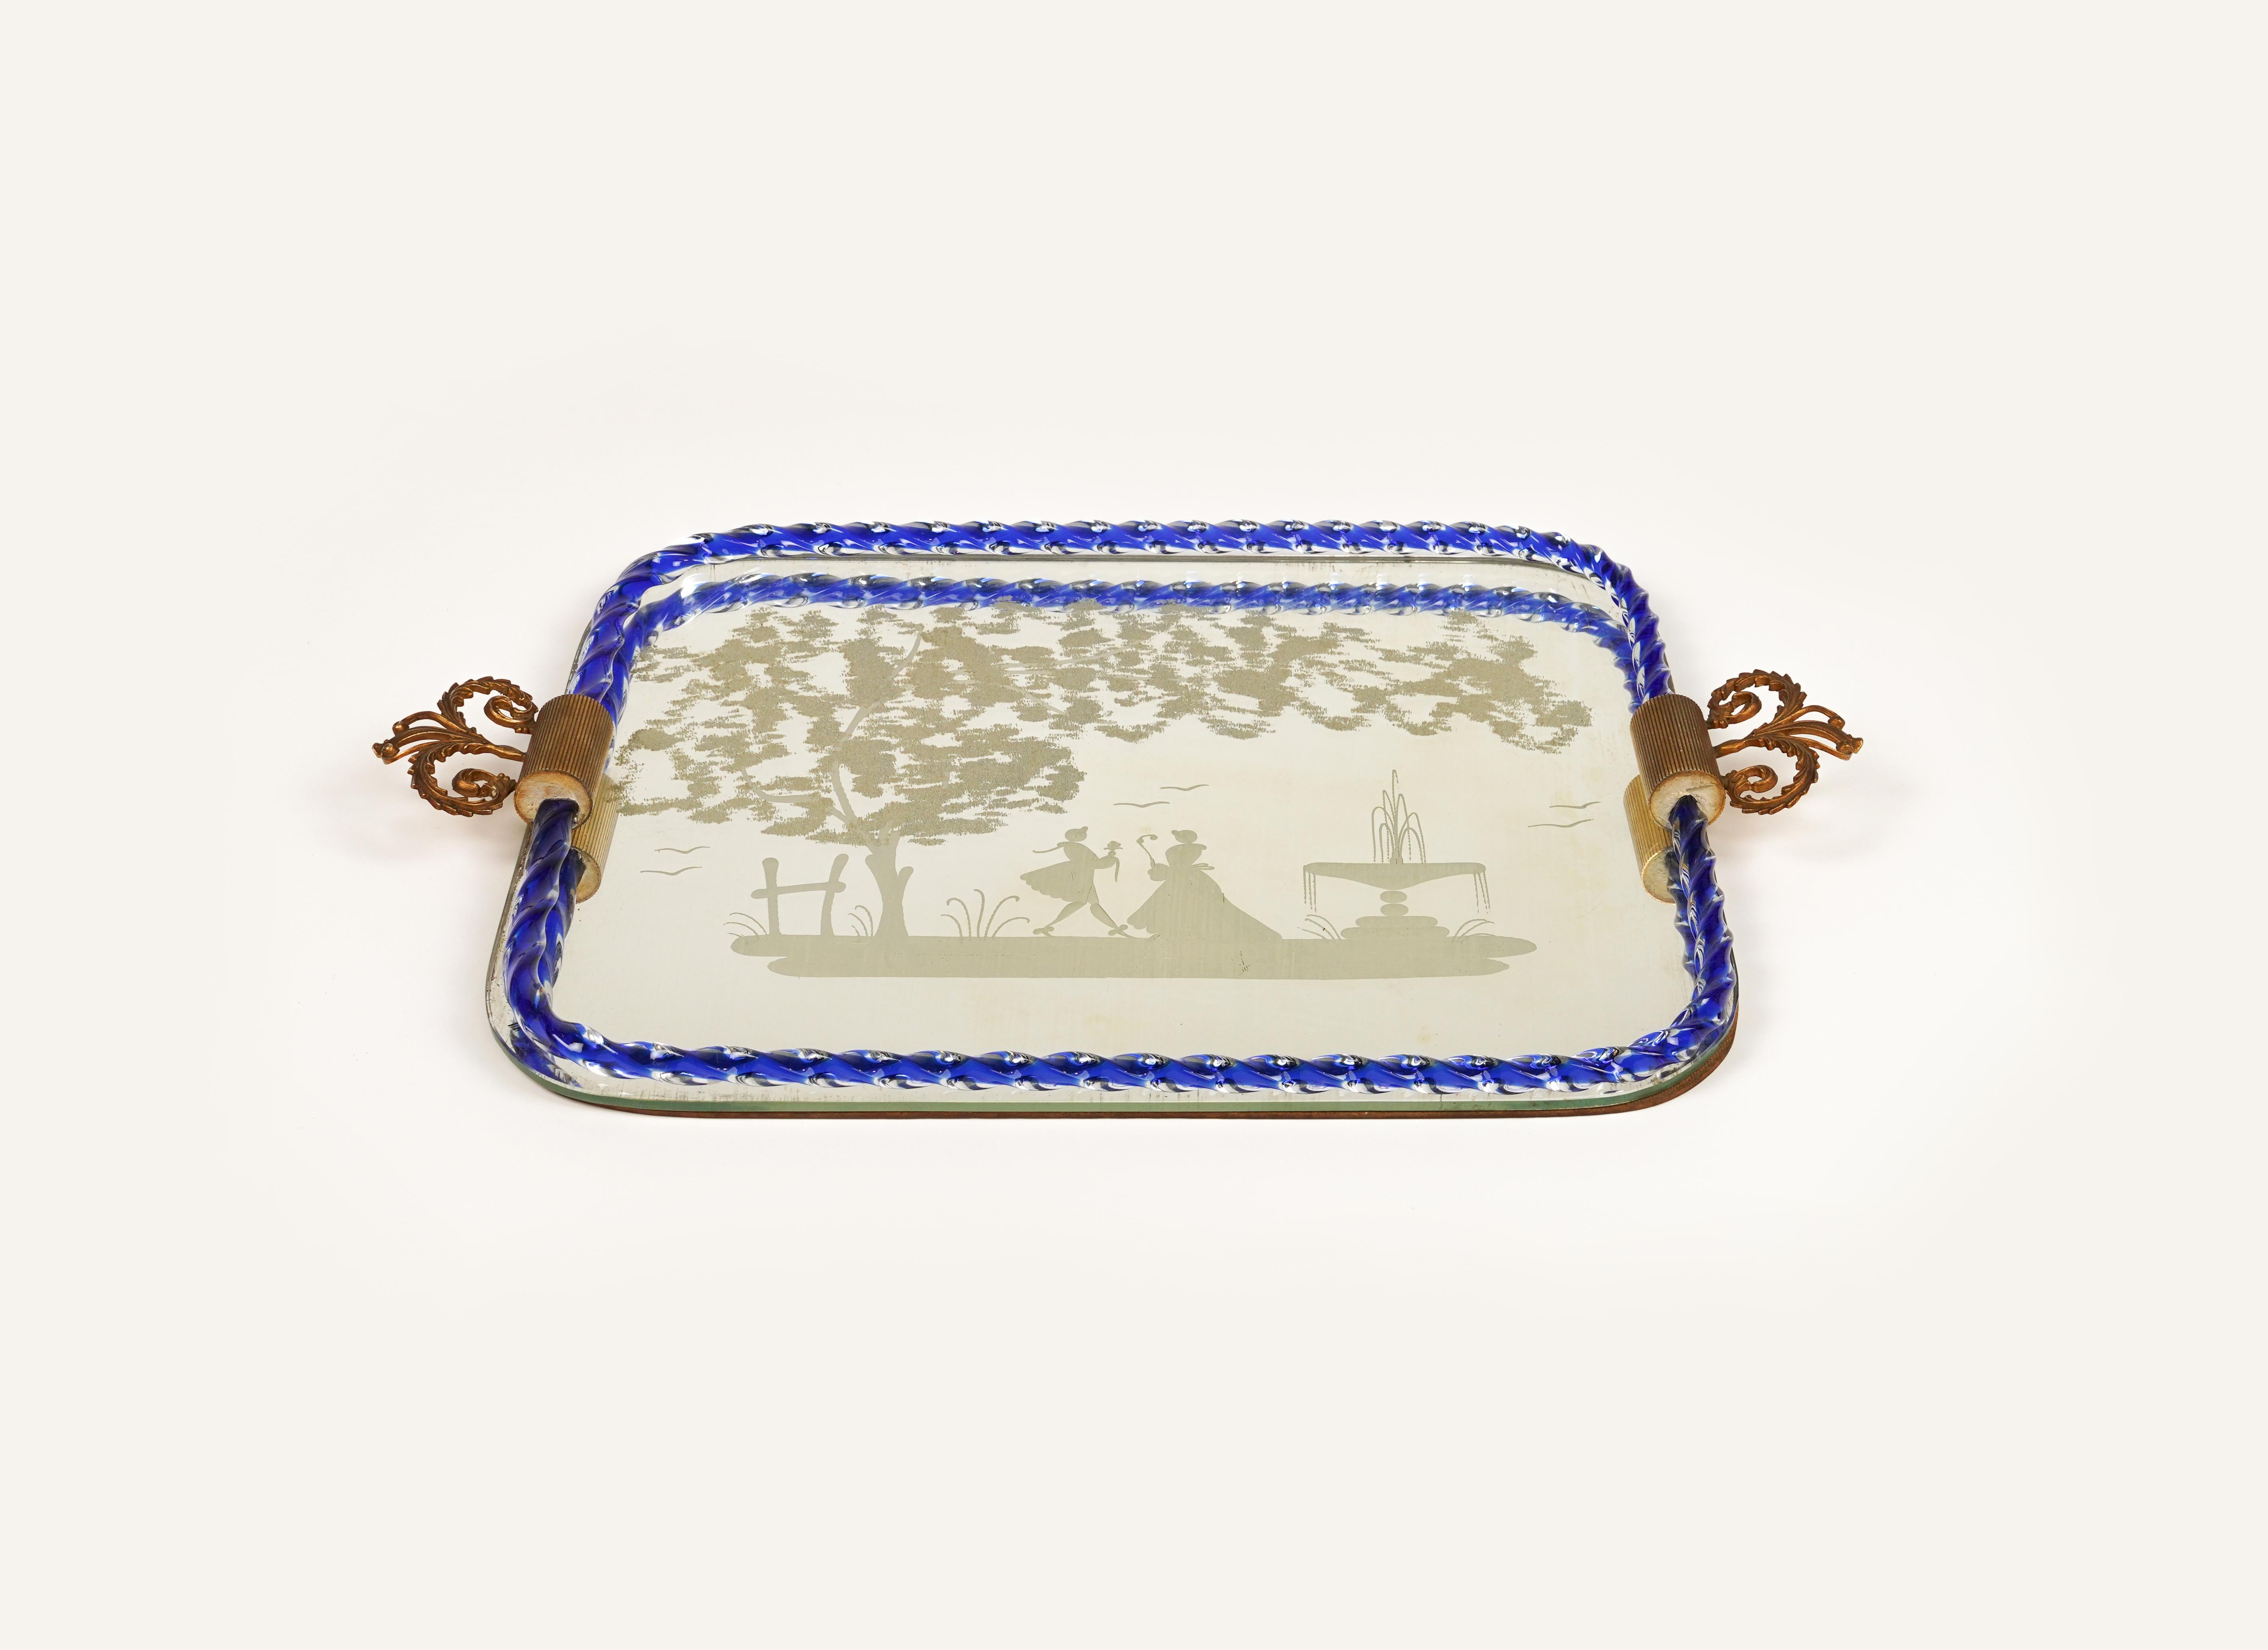 Amazing Midcentury mirror-engraved Murano glass serving tray. 

This wonderful piece was produced in Italy during 1950s by the master Murano glass-maker of Ercole Barovier. 

This wonderful item is a peculiar Venetian vintage tray with a mirror base